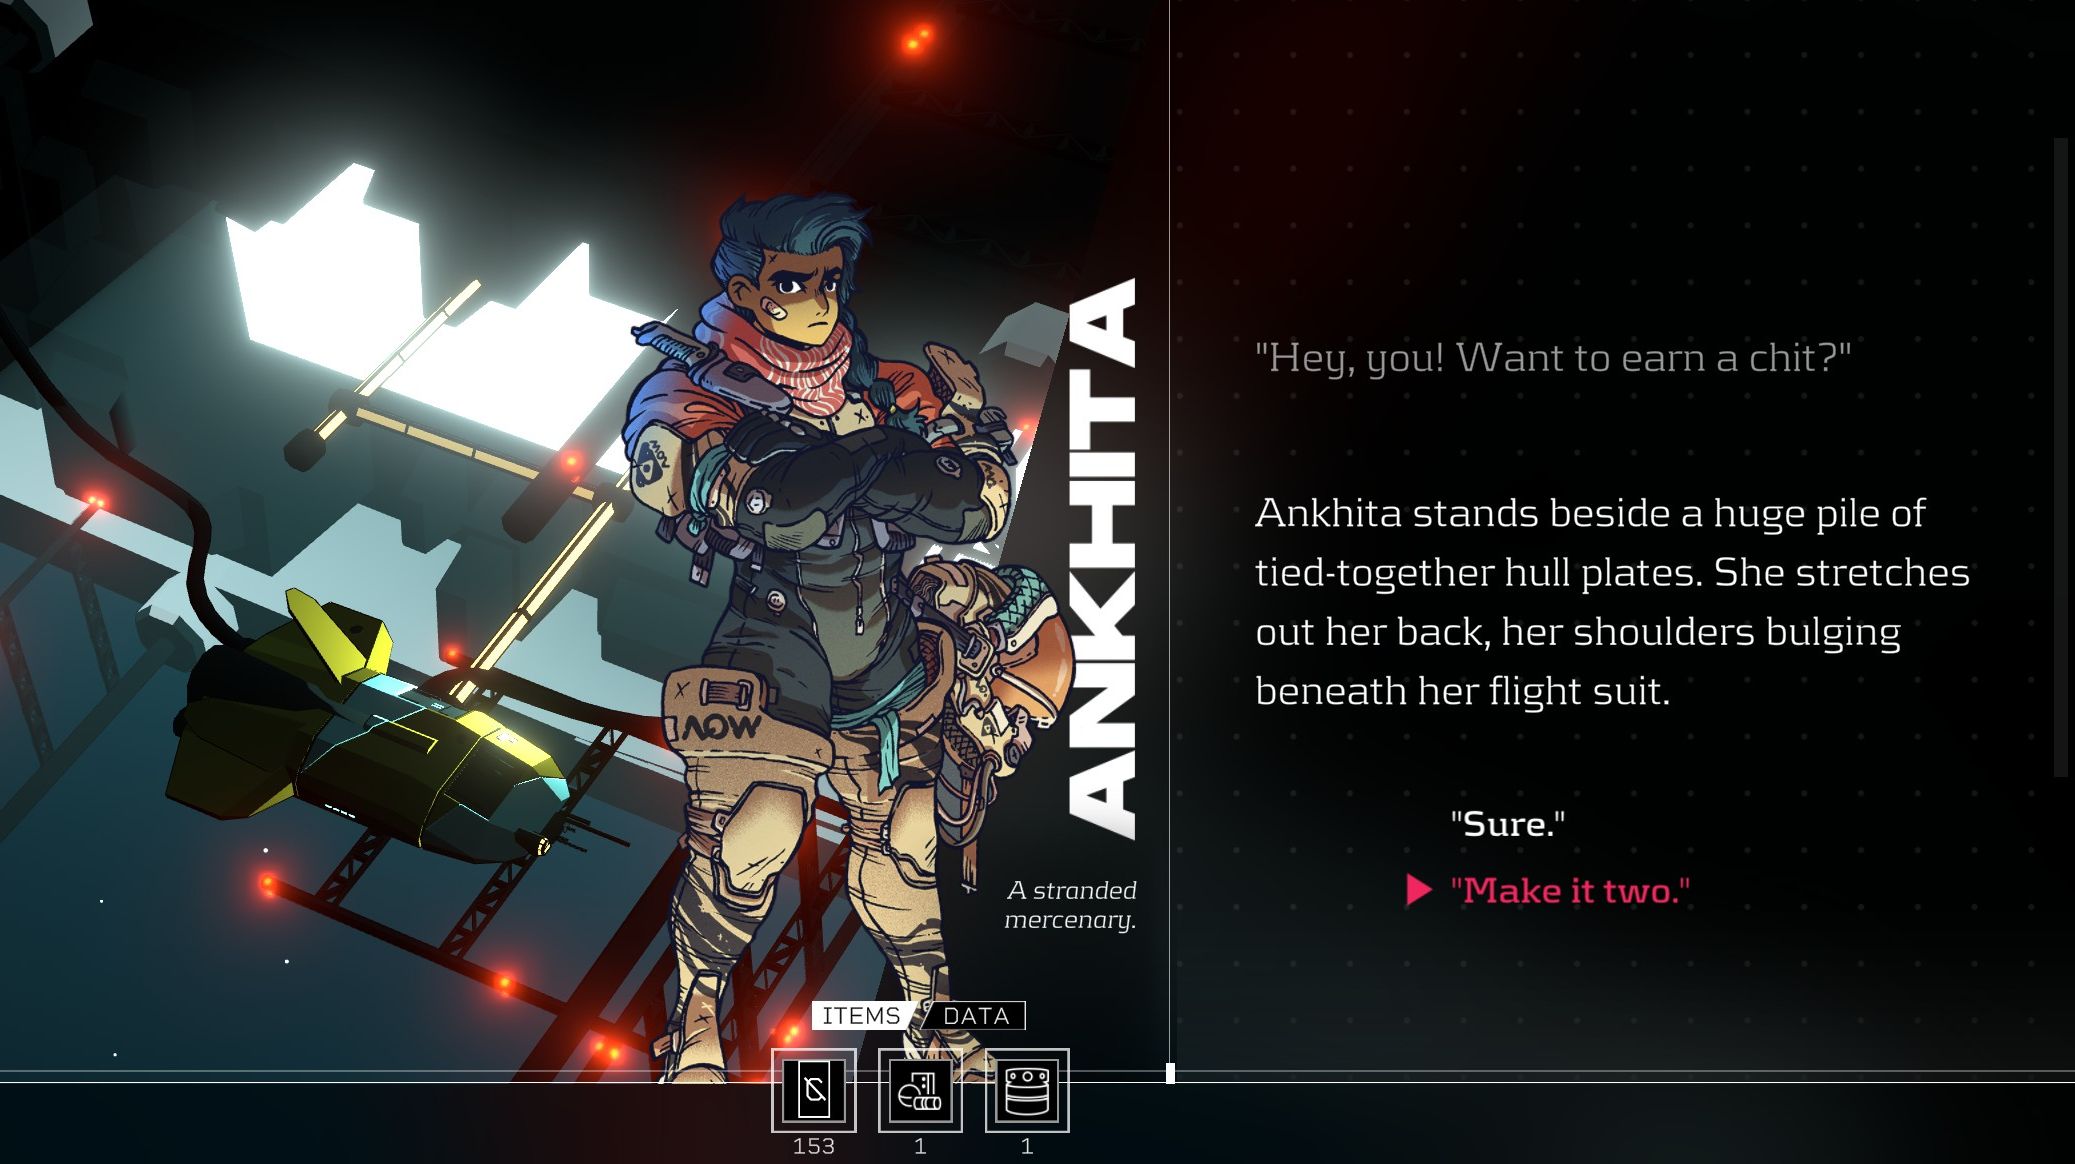 Ankhita, a stranded mercenary, asks the player character in Citizen Sleeper if they want to earn a chit